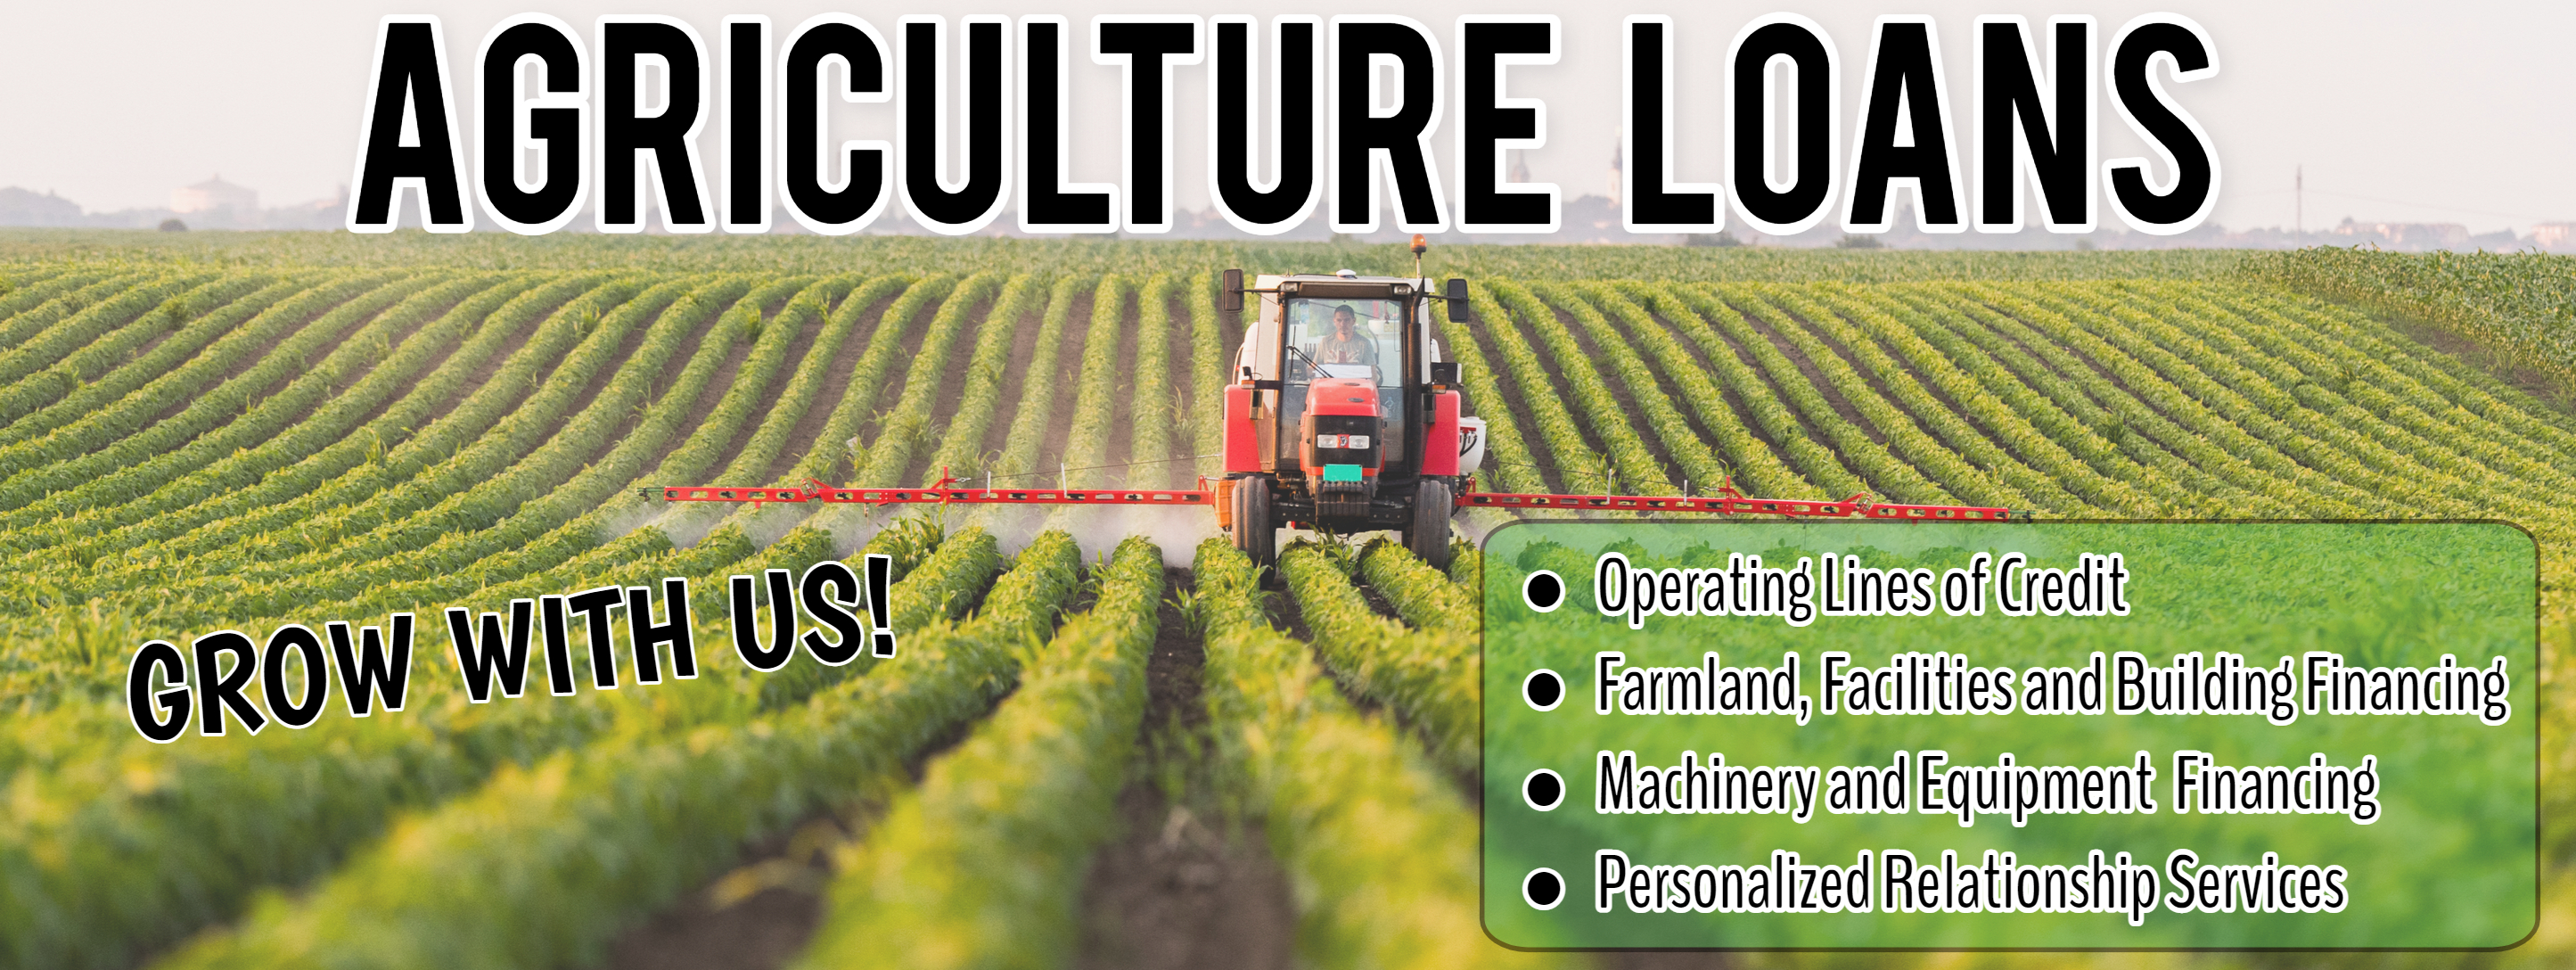 Agriculture Loans. Grow with us! Operating Lines of Credit. Farmland, Facilities and Building Financing. Machinery and Equipment Financing. Personalized Relationship Services.